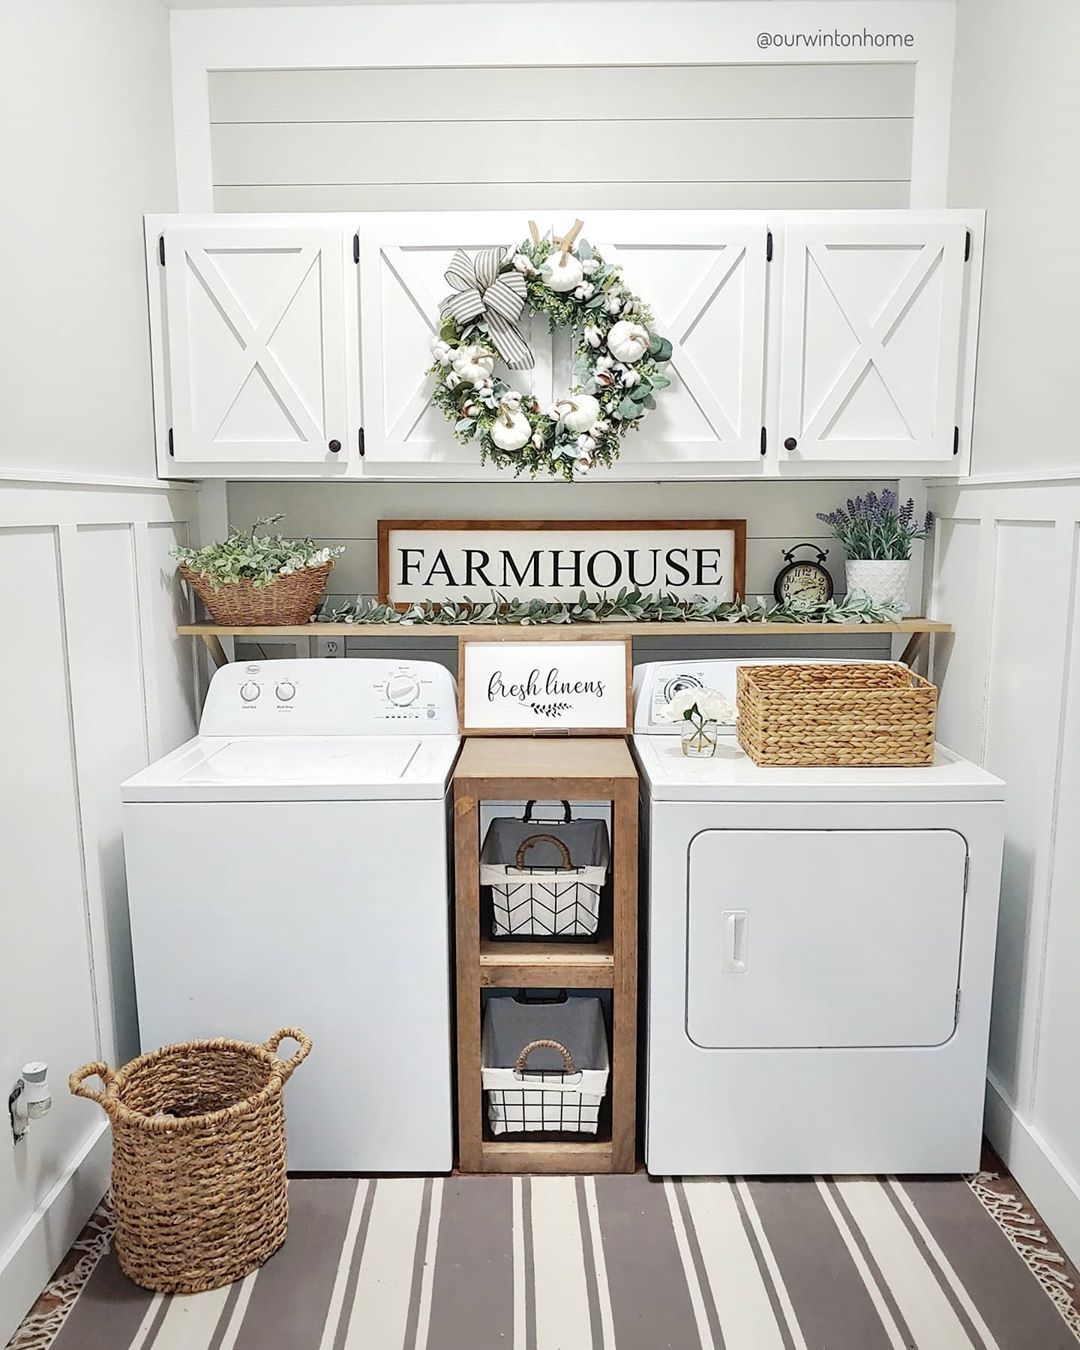 50 Best Laundry Room Ideas and Storage Designs for Small Spaces